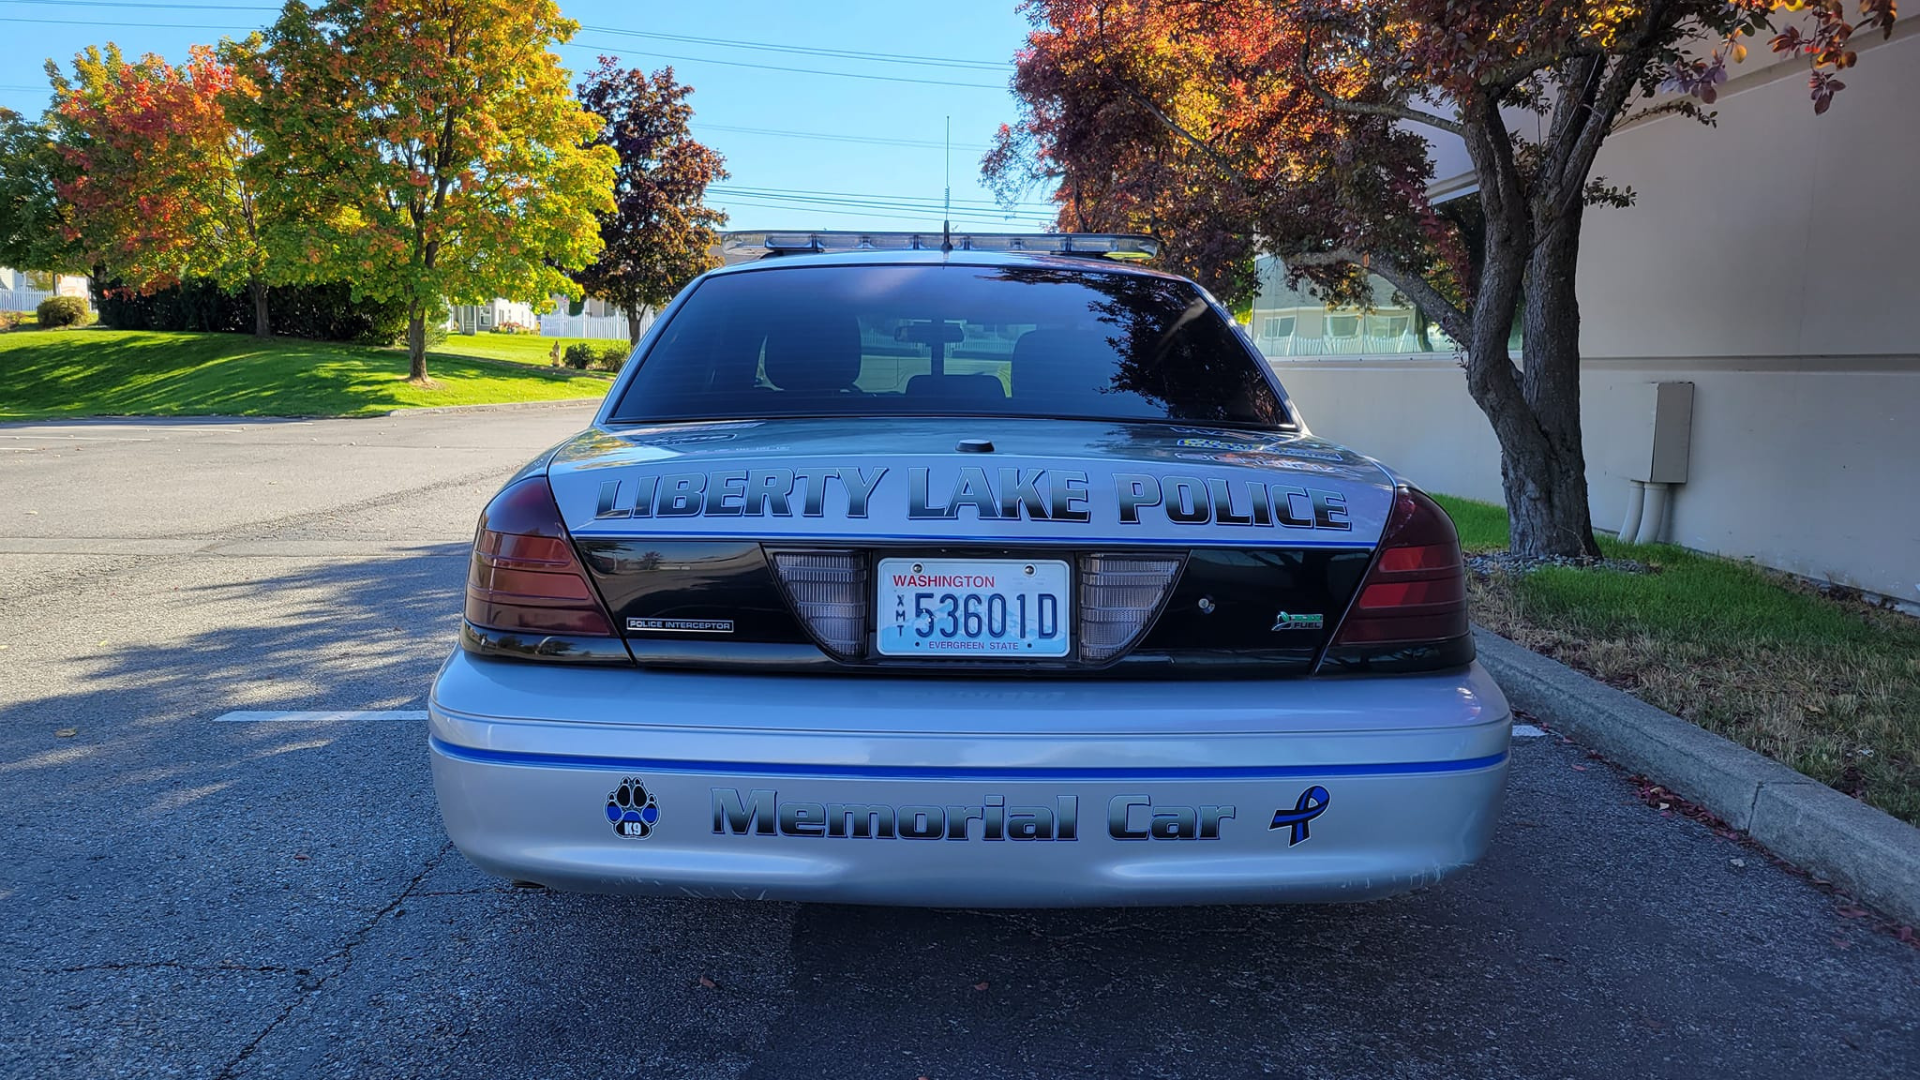 Rear angle of a Liberty Lake Police Memorial Car, showcasing the police logo and the "Memorial Car" label, parked on a suburban street.